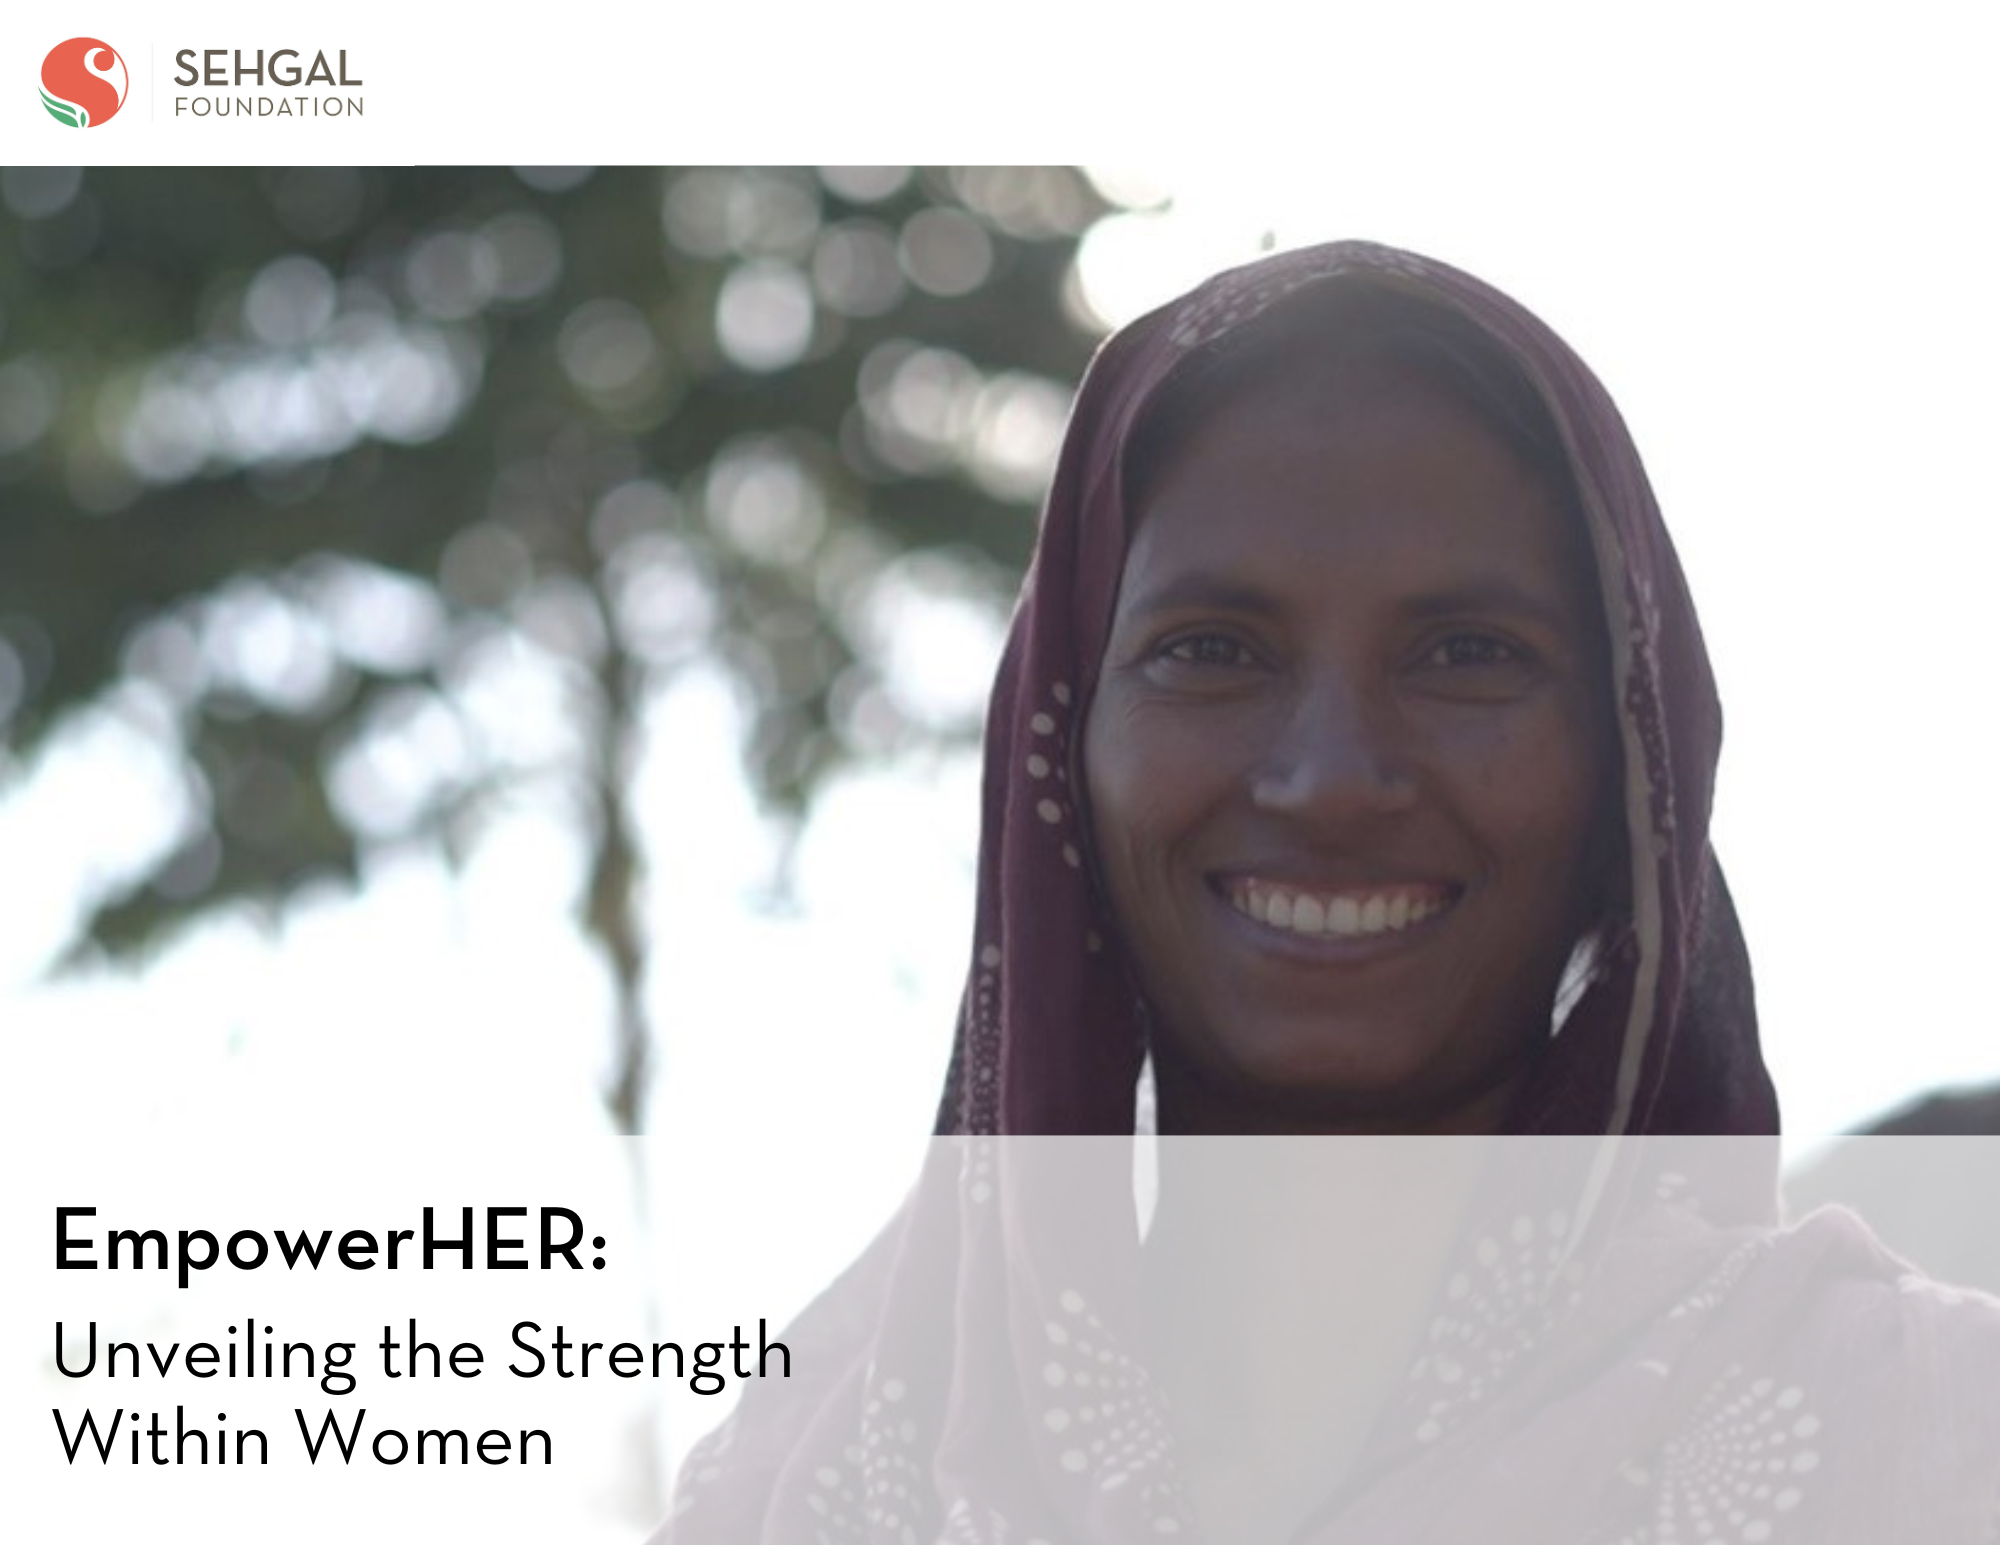 https://stratus.campaign-image.com/images/194670000031735006_zc_v1_1695705253240_empowerher_unveiling_the_strength_within_women.png